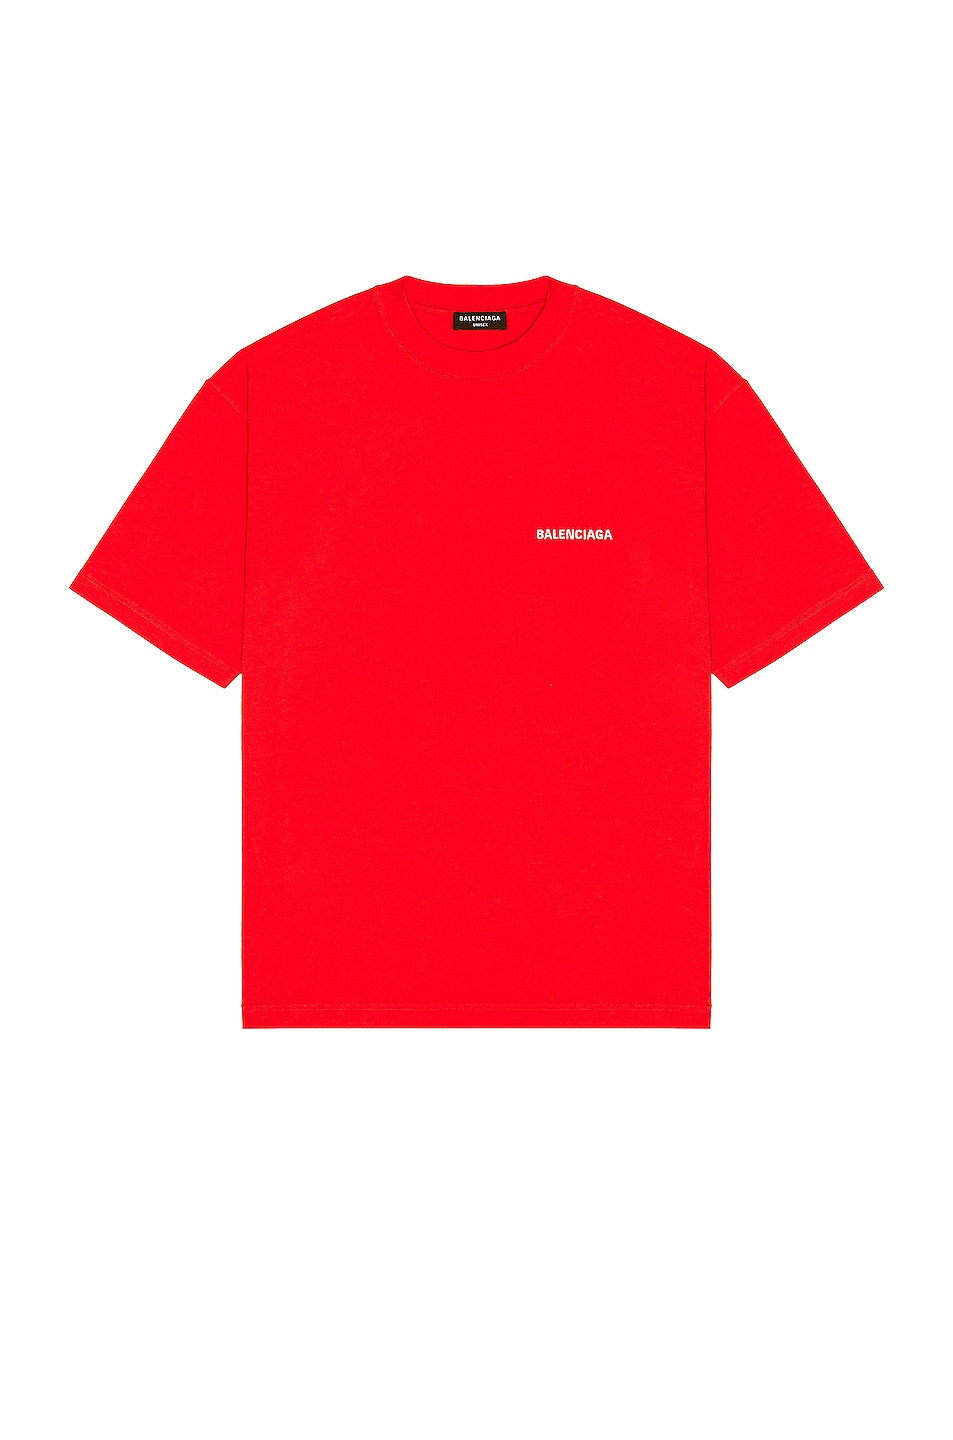 Image 1 of Balenciaga Medium Fit T-Shirt in Bright Red & White